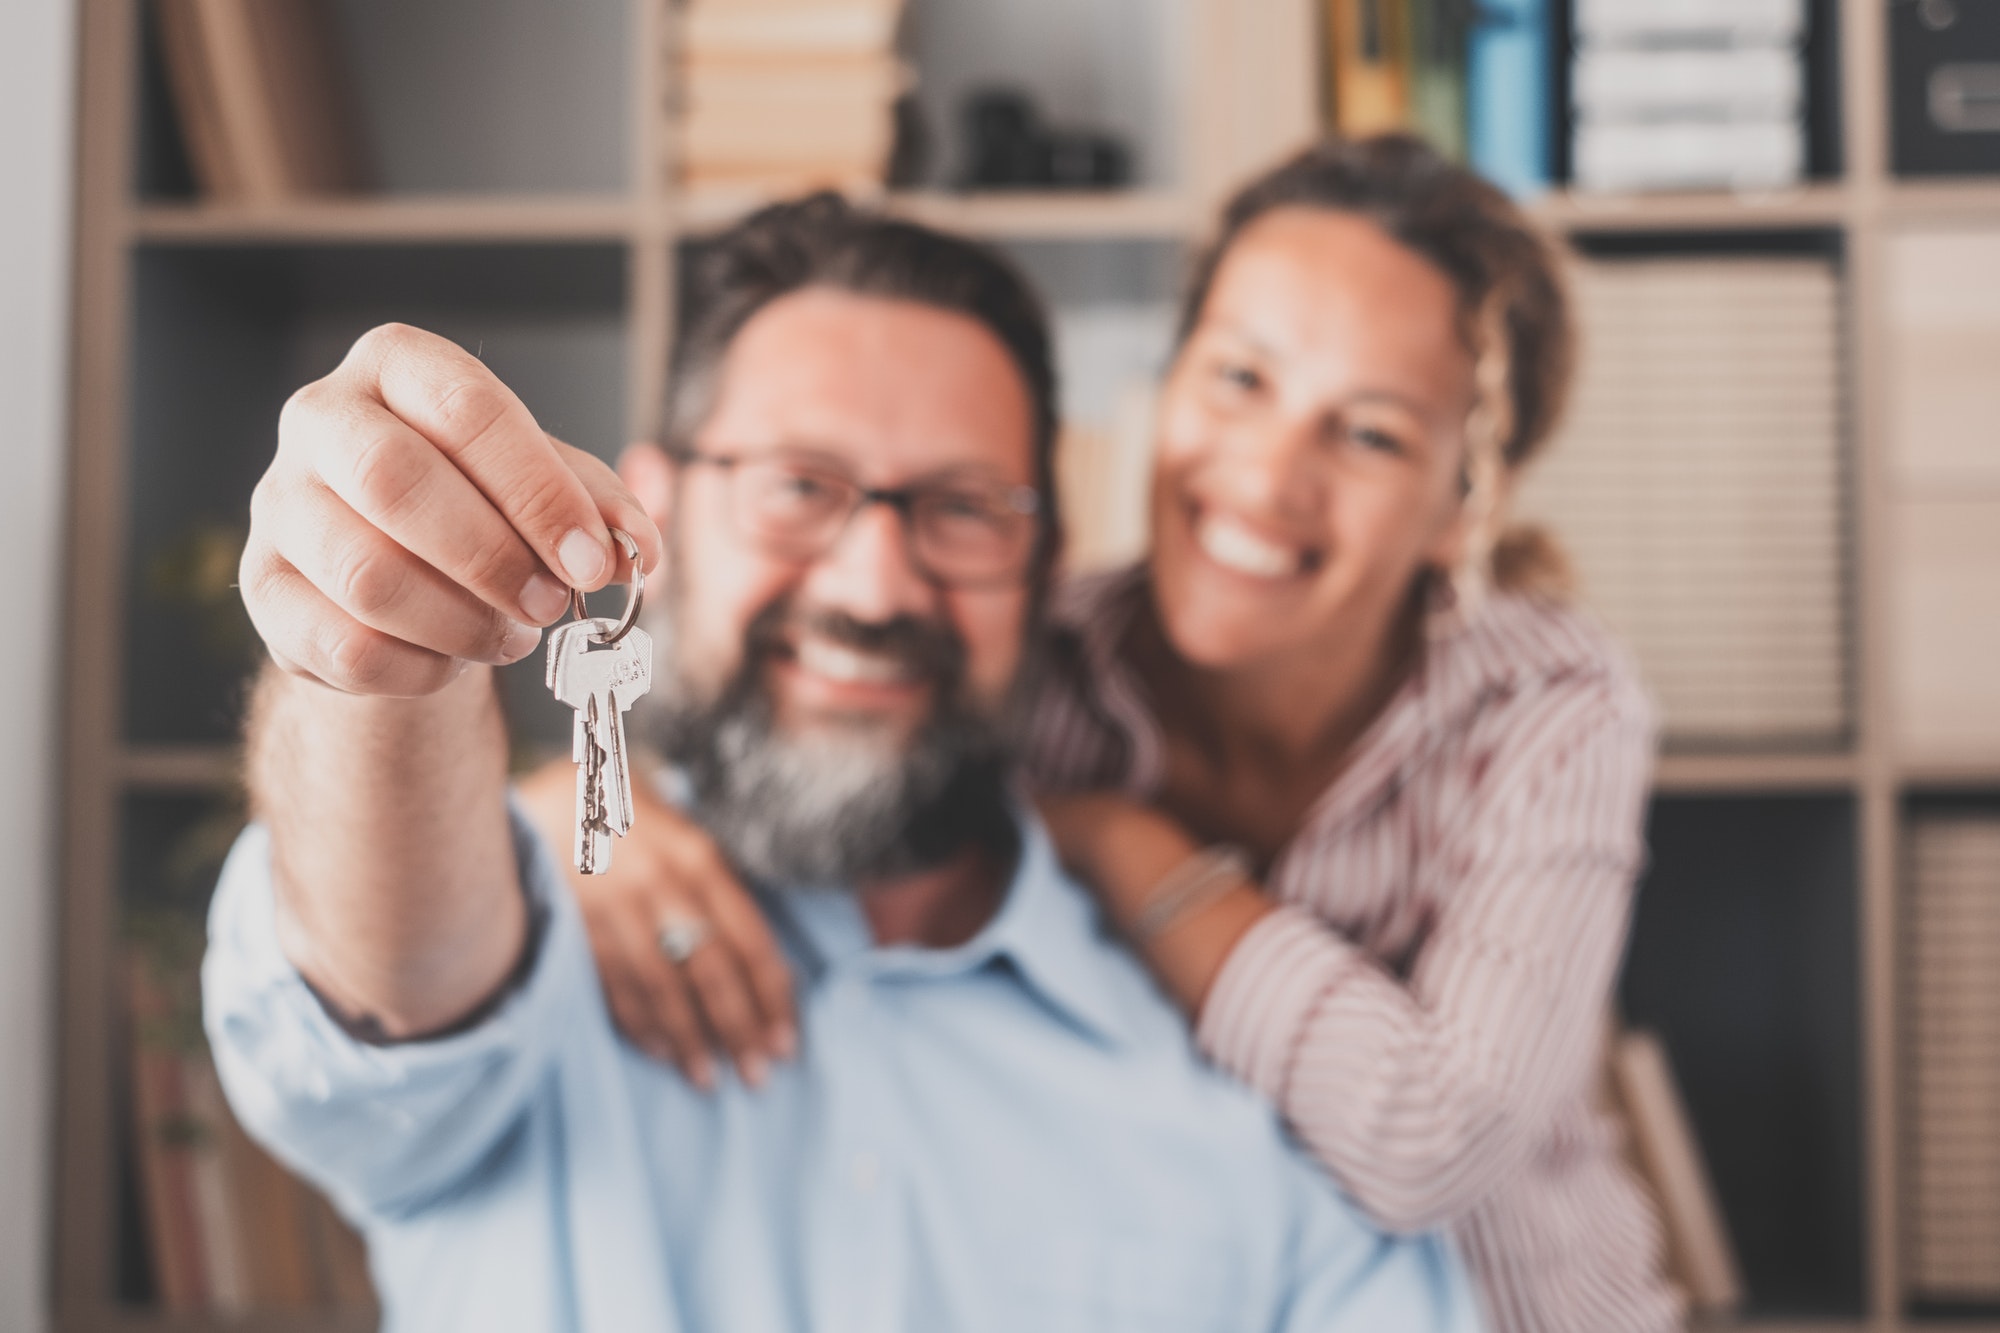 Focus on keys, held by excited young spouses homeowners. Happy married family couple